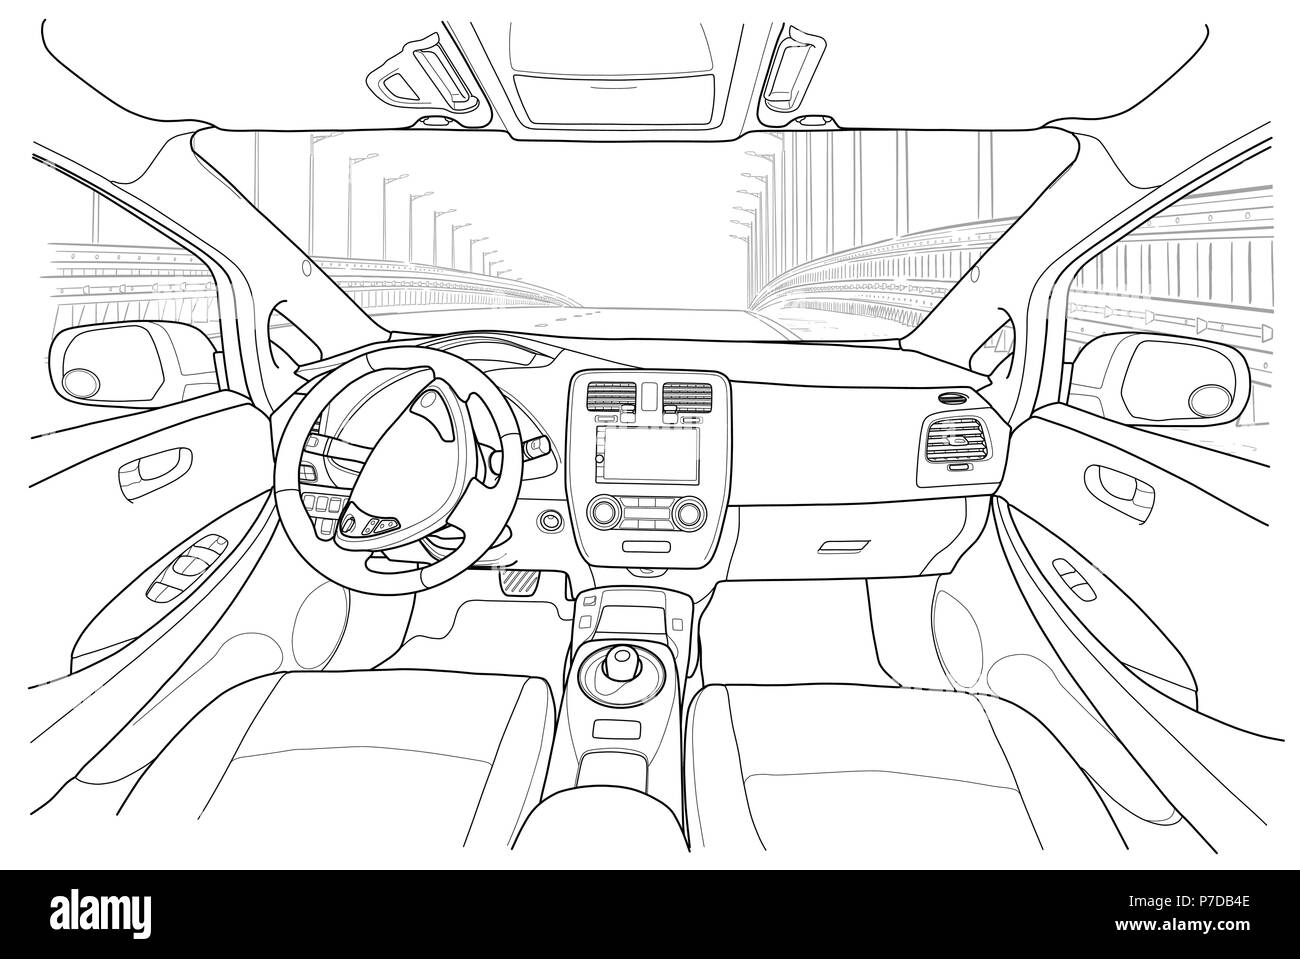 Interior of electromobile with automatic gearbox Stock Vector